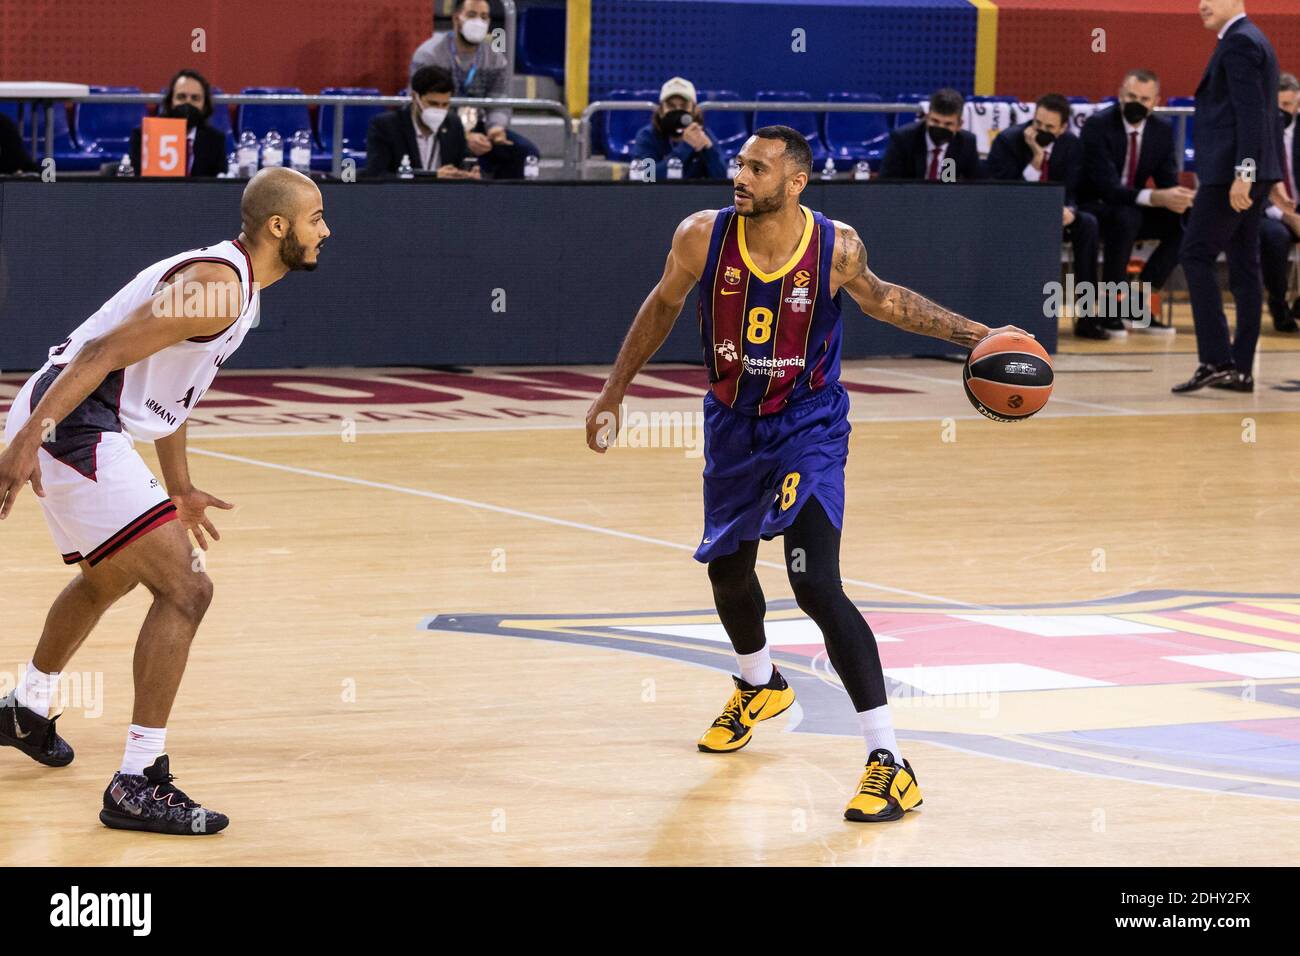 Adam Hanga of Fc Barcelona during the Turkish Airlines EuroLeague basketball  match between Fc Barcelona and AX Armani Exchange / LM Stock Photo - Alamy